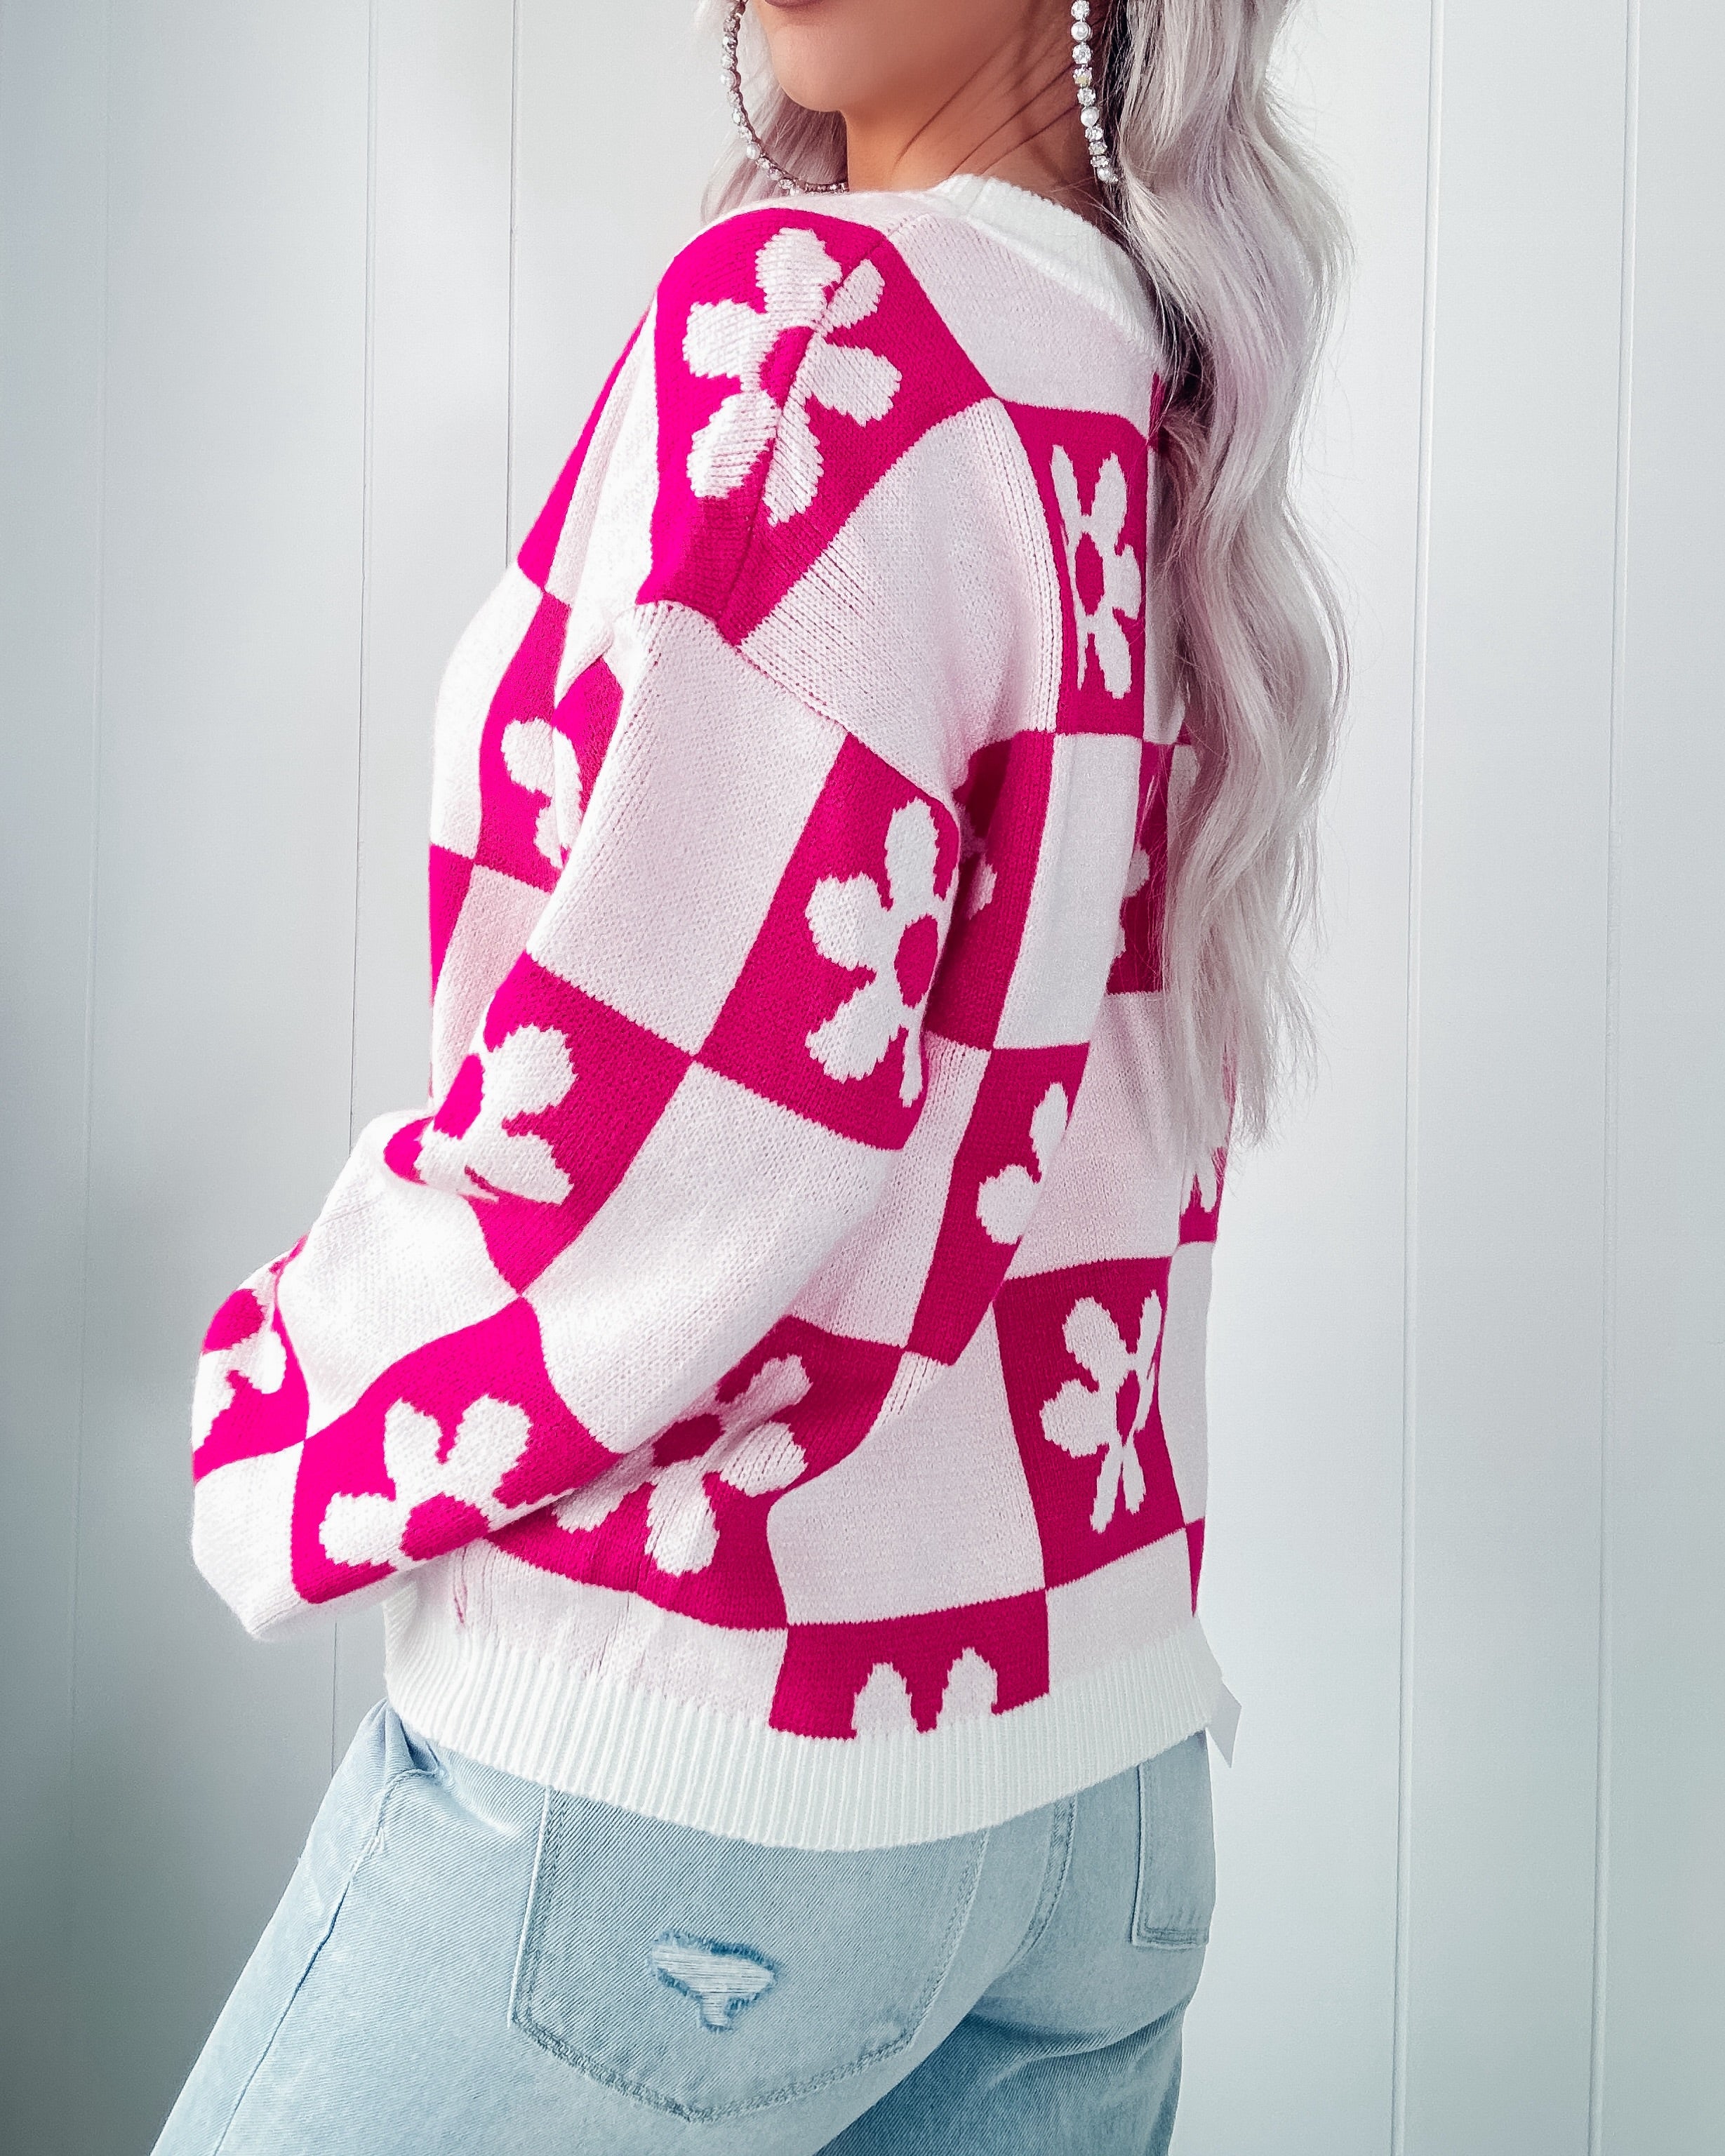 Perfect Timing Flower Checkered Sweater - Hot Pink